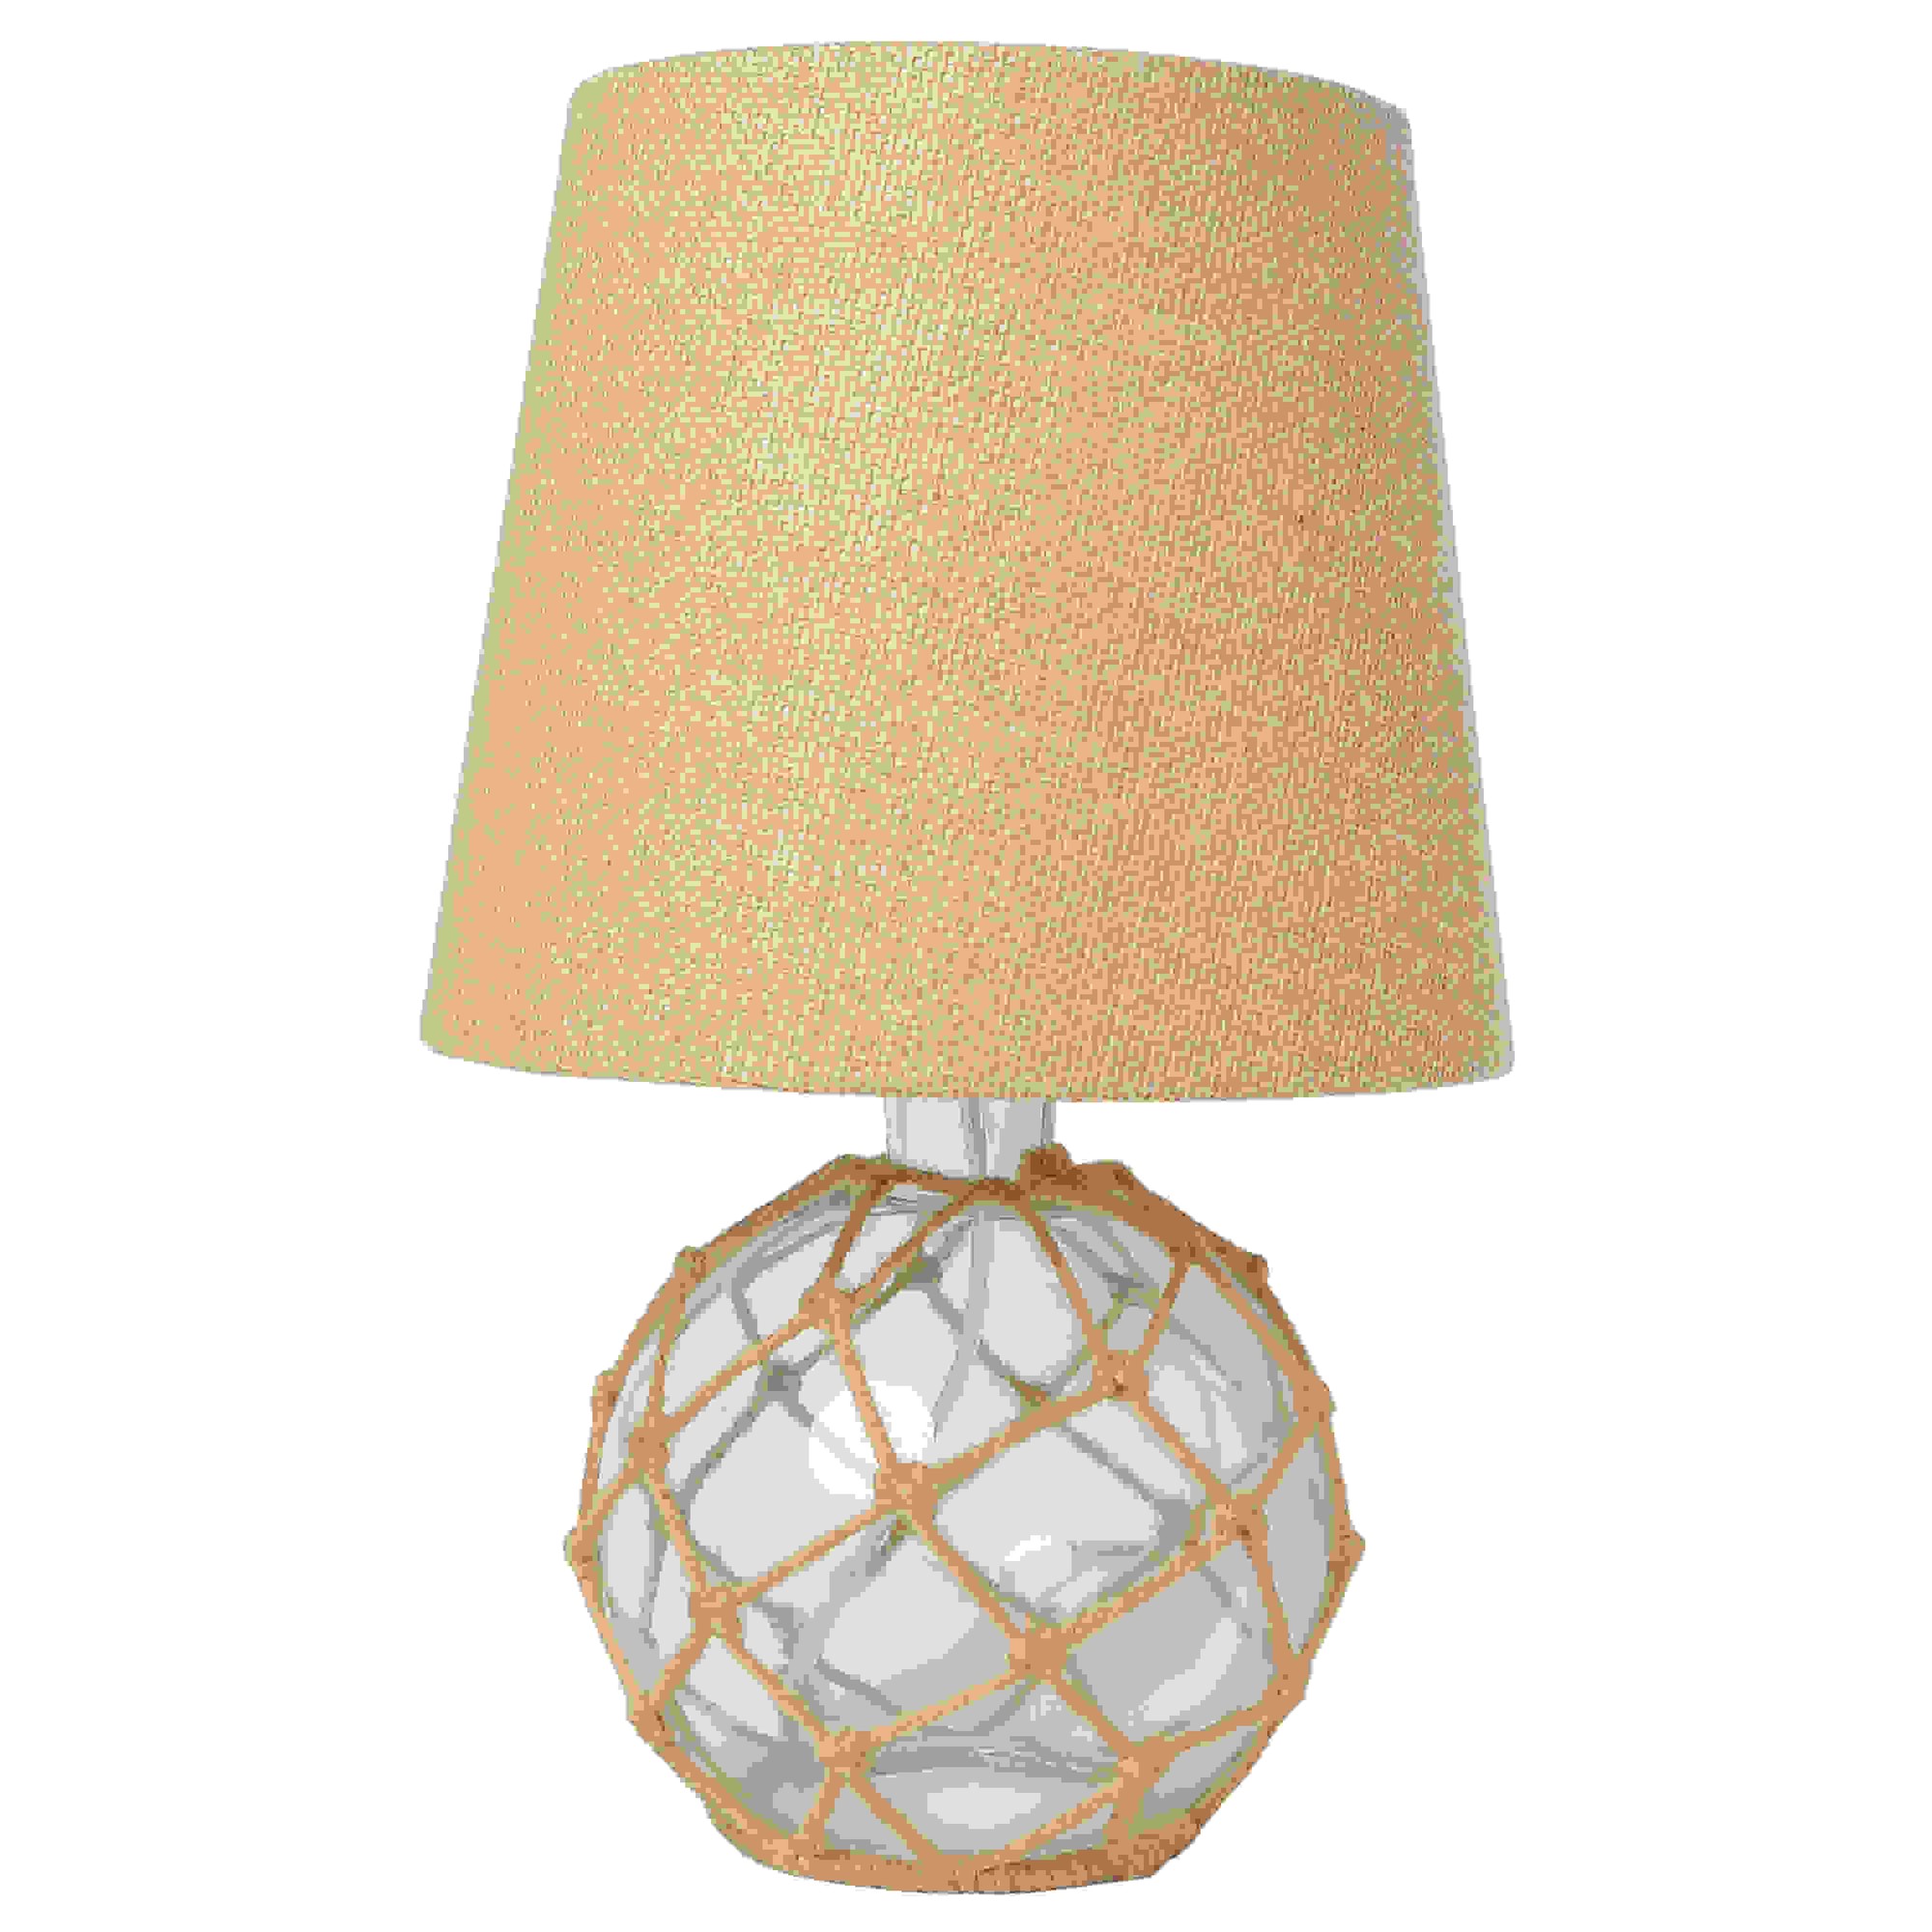 Elegant Designs Buoy Rope Nautical Netted Coastal Ocean Sea Glass Table Lamp with Burlap Fabric Shade, Clear